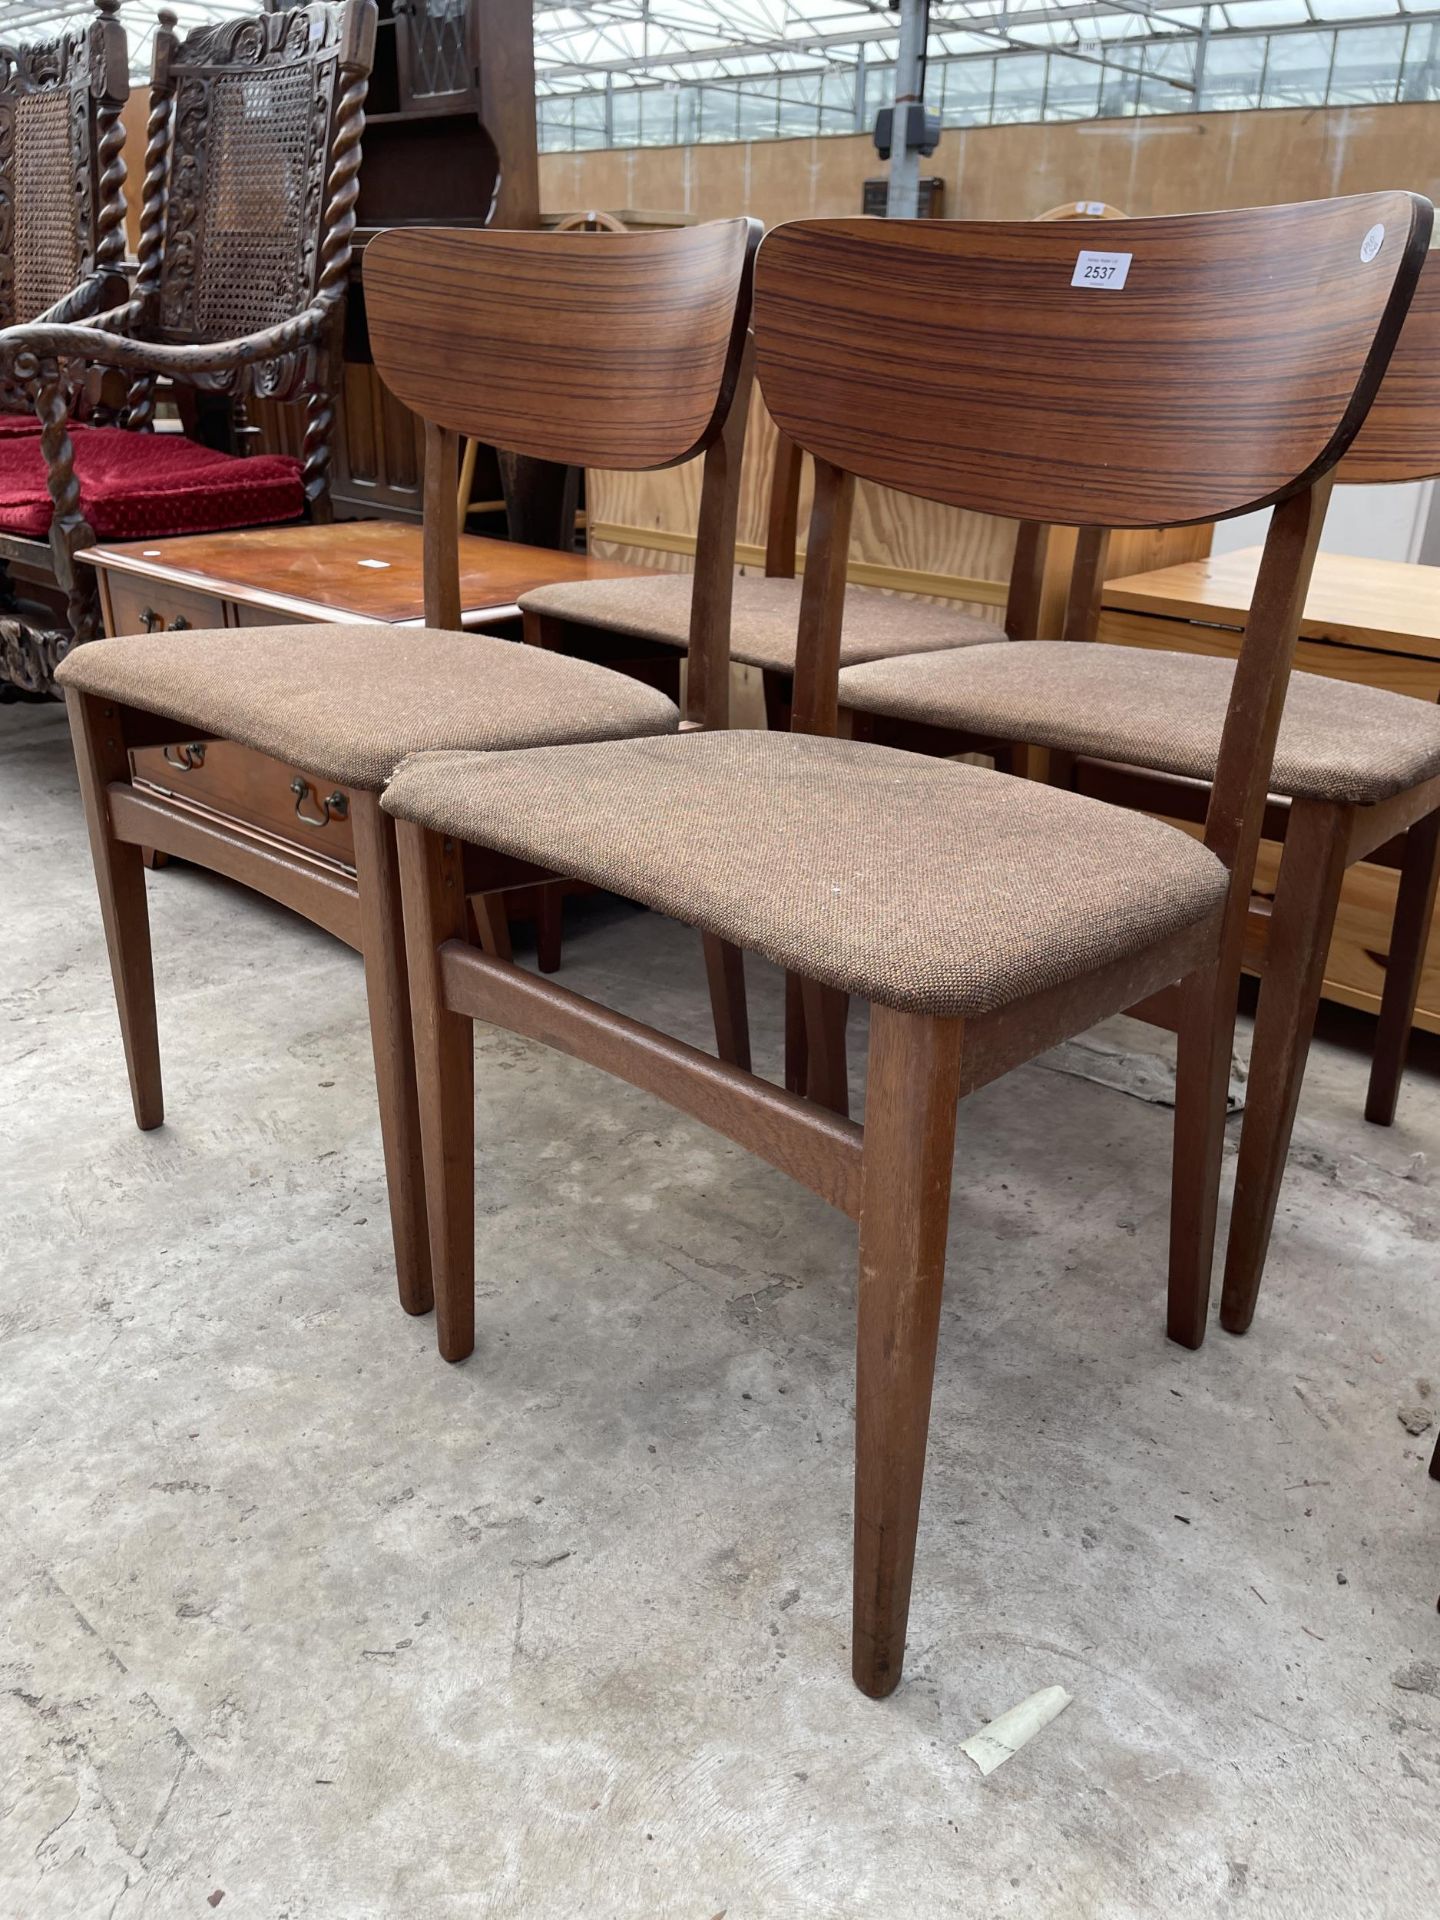 A SET OF FOUR RETRO TEAK DINING CHAIRS - Image 2 of 2